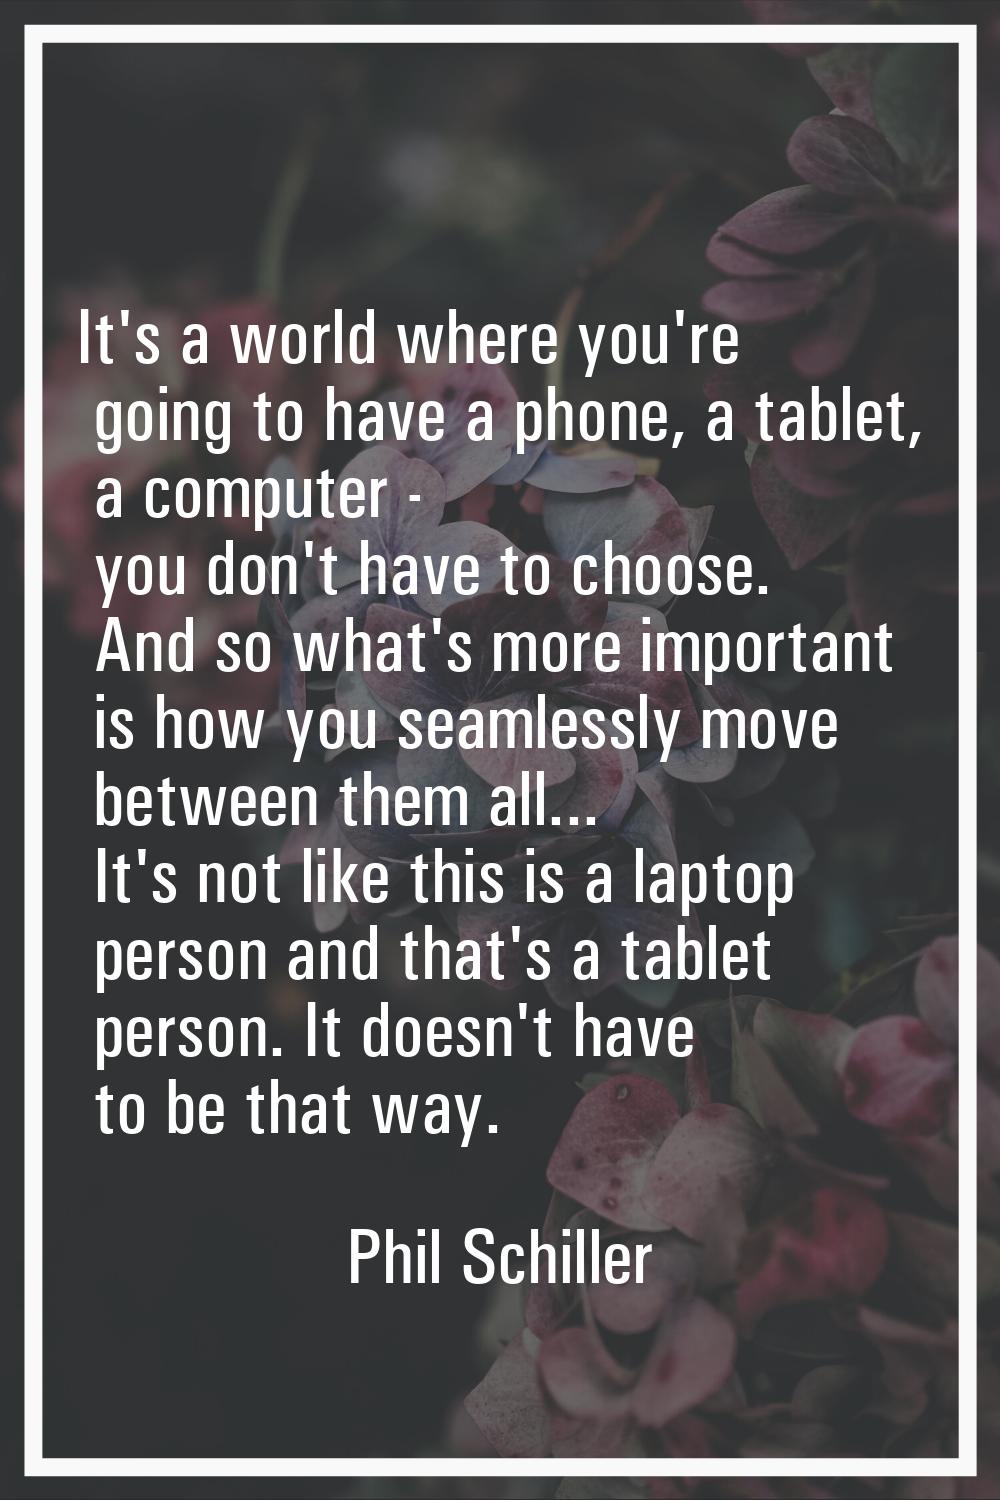 It's a world where you're going to have a phone, a tablet, a computer - you don't have to choose. A